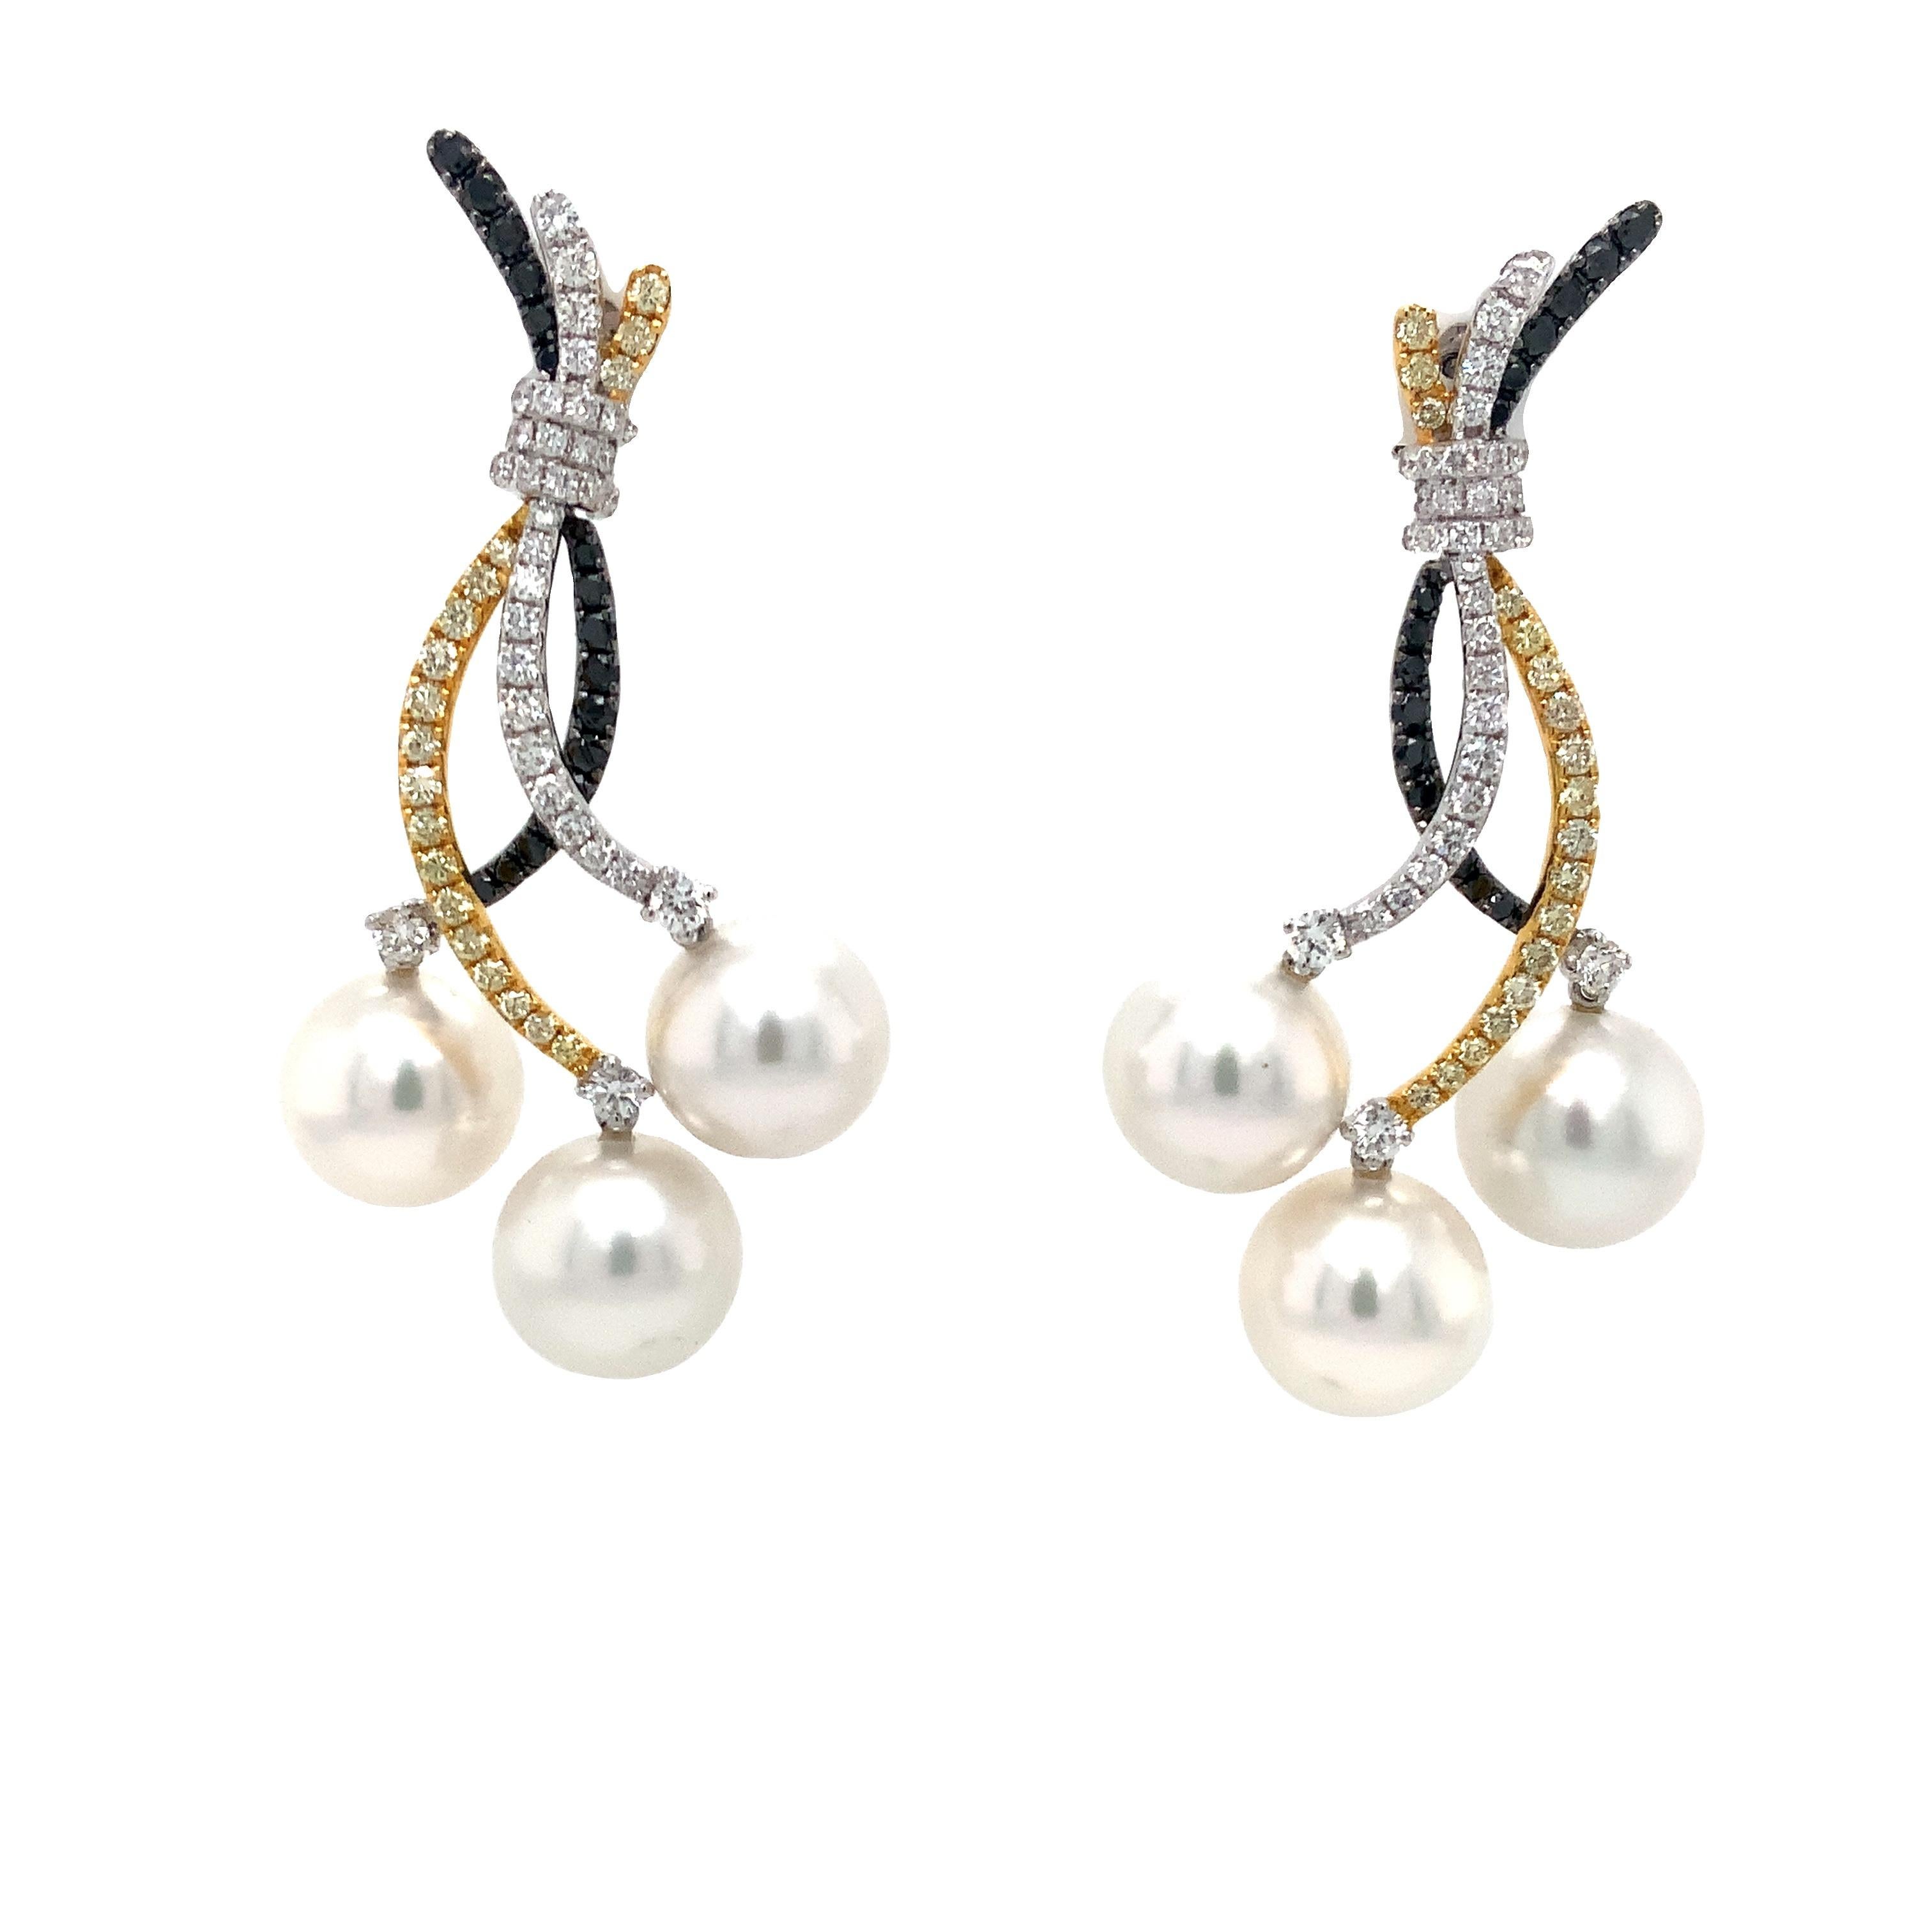 Tri-Color Diamond and Triple White South Sea Pearl Drop Earrings set in 18 kt Gold. Featuring Fancy Yellow Diamonds, White Diamonds, and Black Diamonds all intricately woven together, these earrings offer a dynamic look with each tapering branch